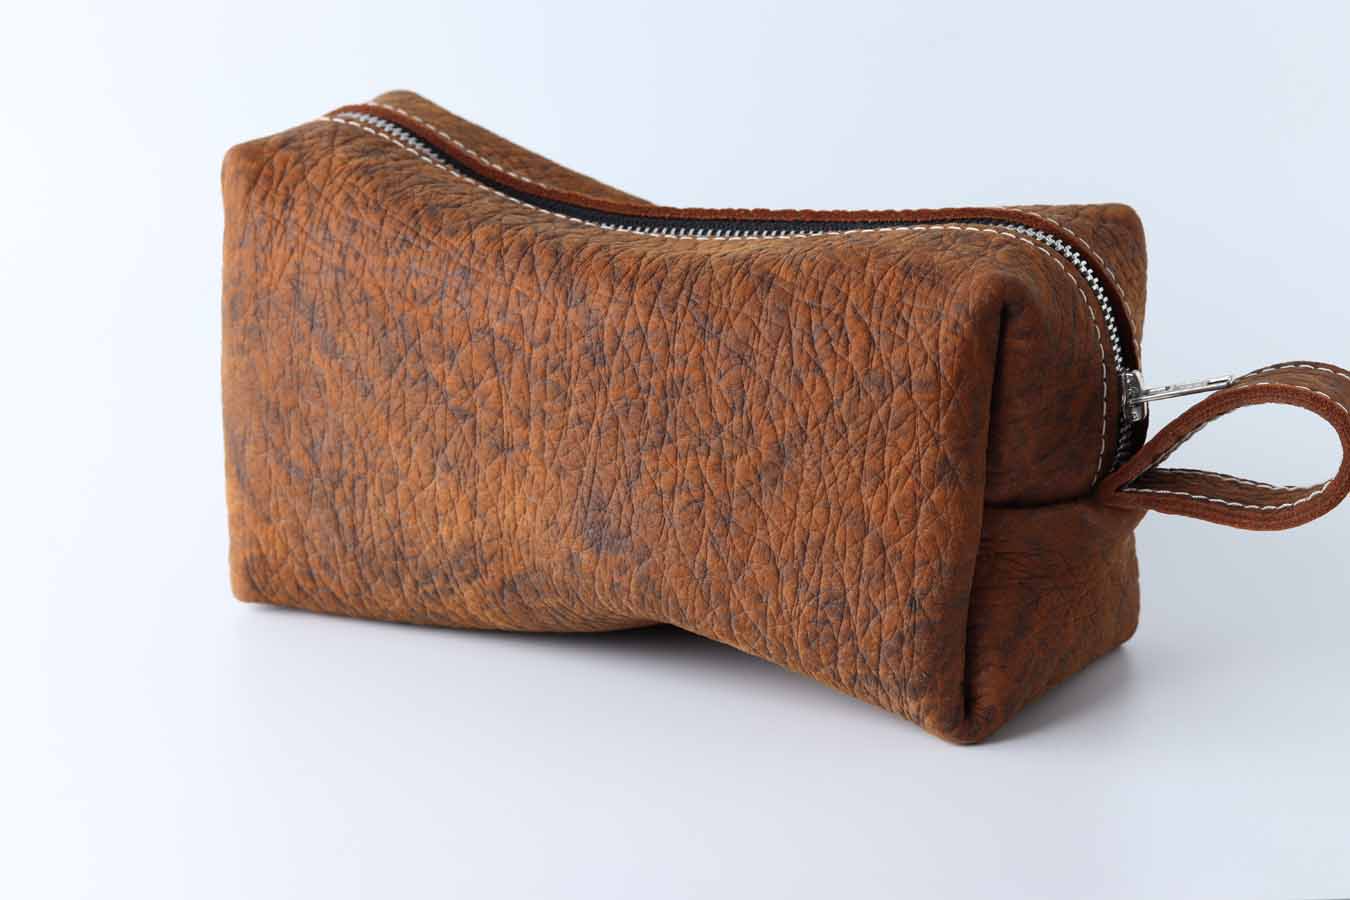 Toiletry Kit & Travel Case in brown leather by kaseta